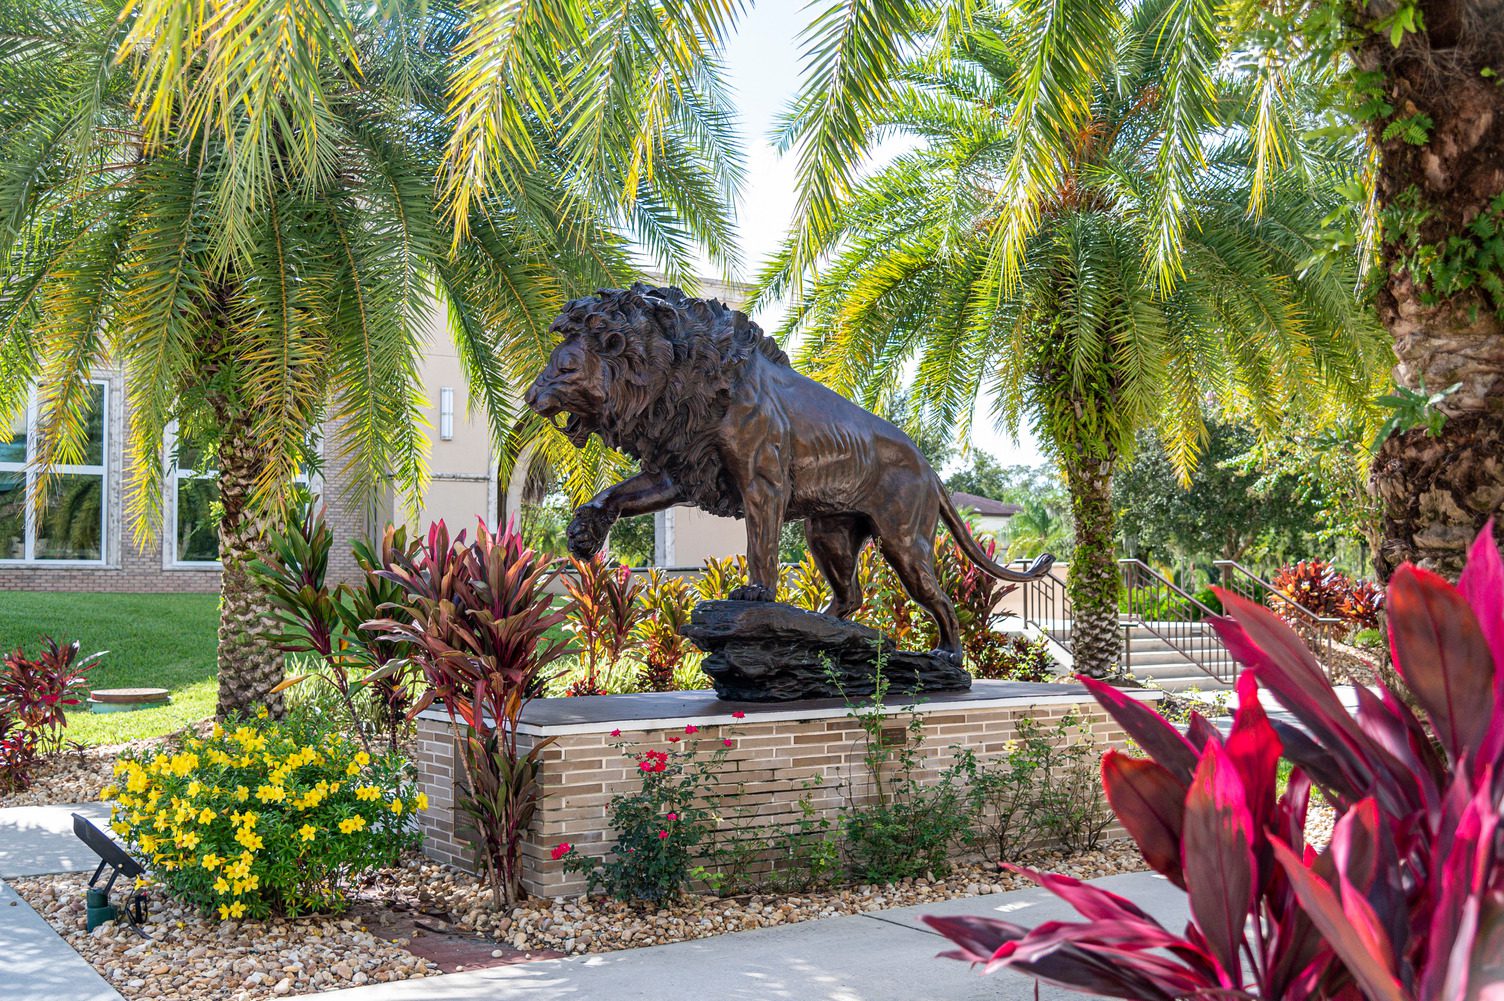 Photo provided by Saint Leo University Saint Leo University will welcome students for in-person classes for Fall Semester 2021. Shown is the Leo the Lion sculpture at University Campus in Pasco County, FL.